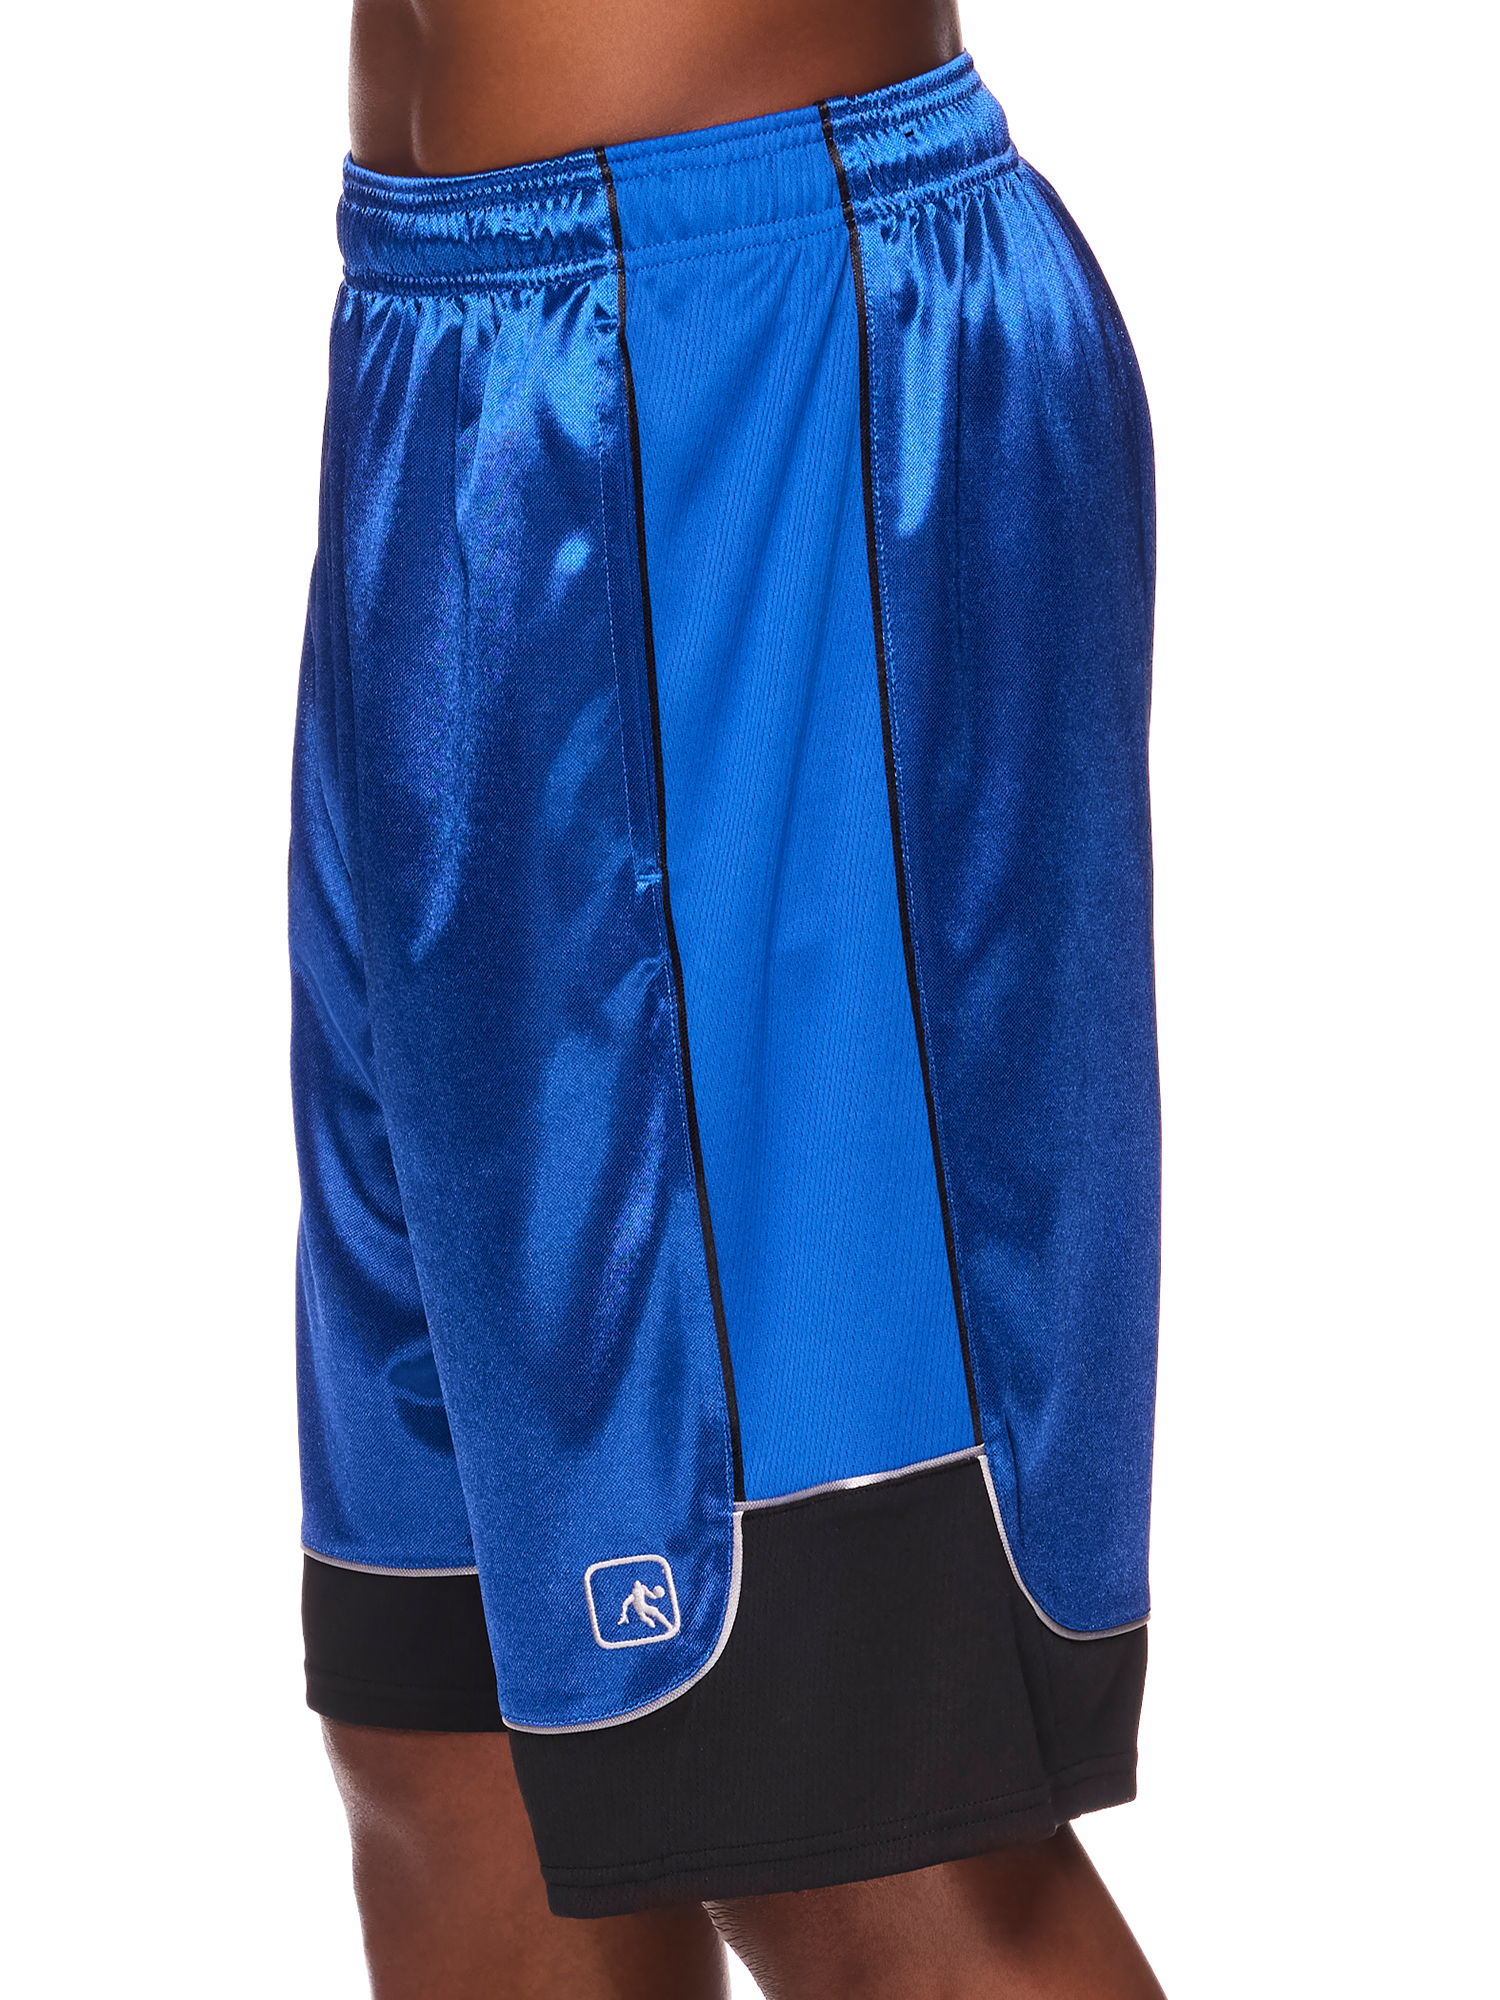 AND1 Men and Big Men's All Court Colorblock 11" Shorts, up to Size 3XL - image 4 of 5